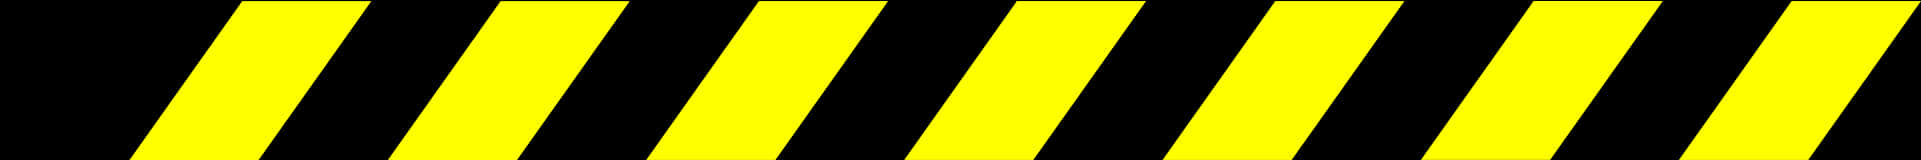 Yellow Black Striped Caution Tape Background PNG image